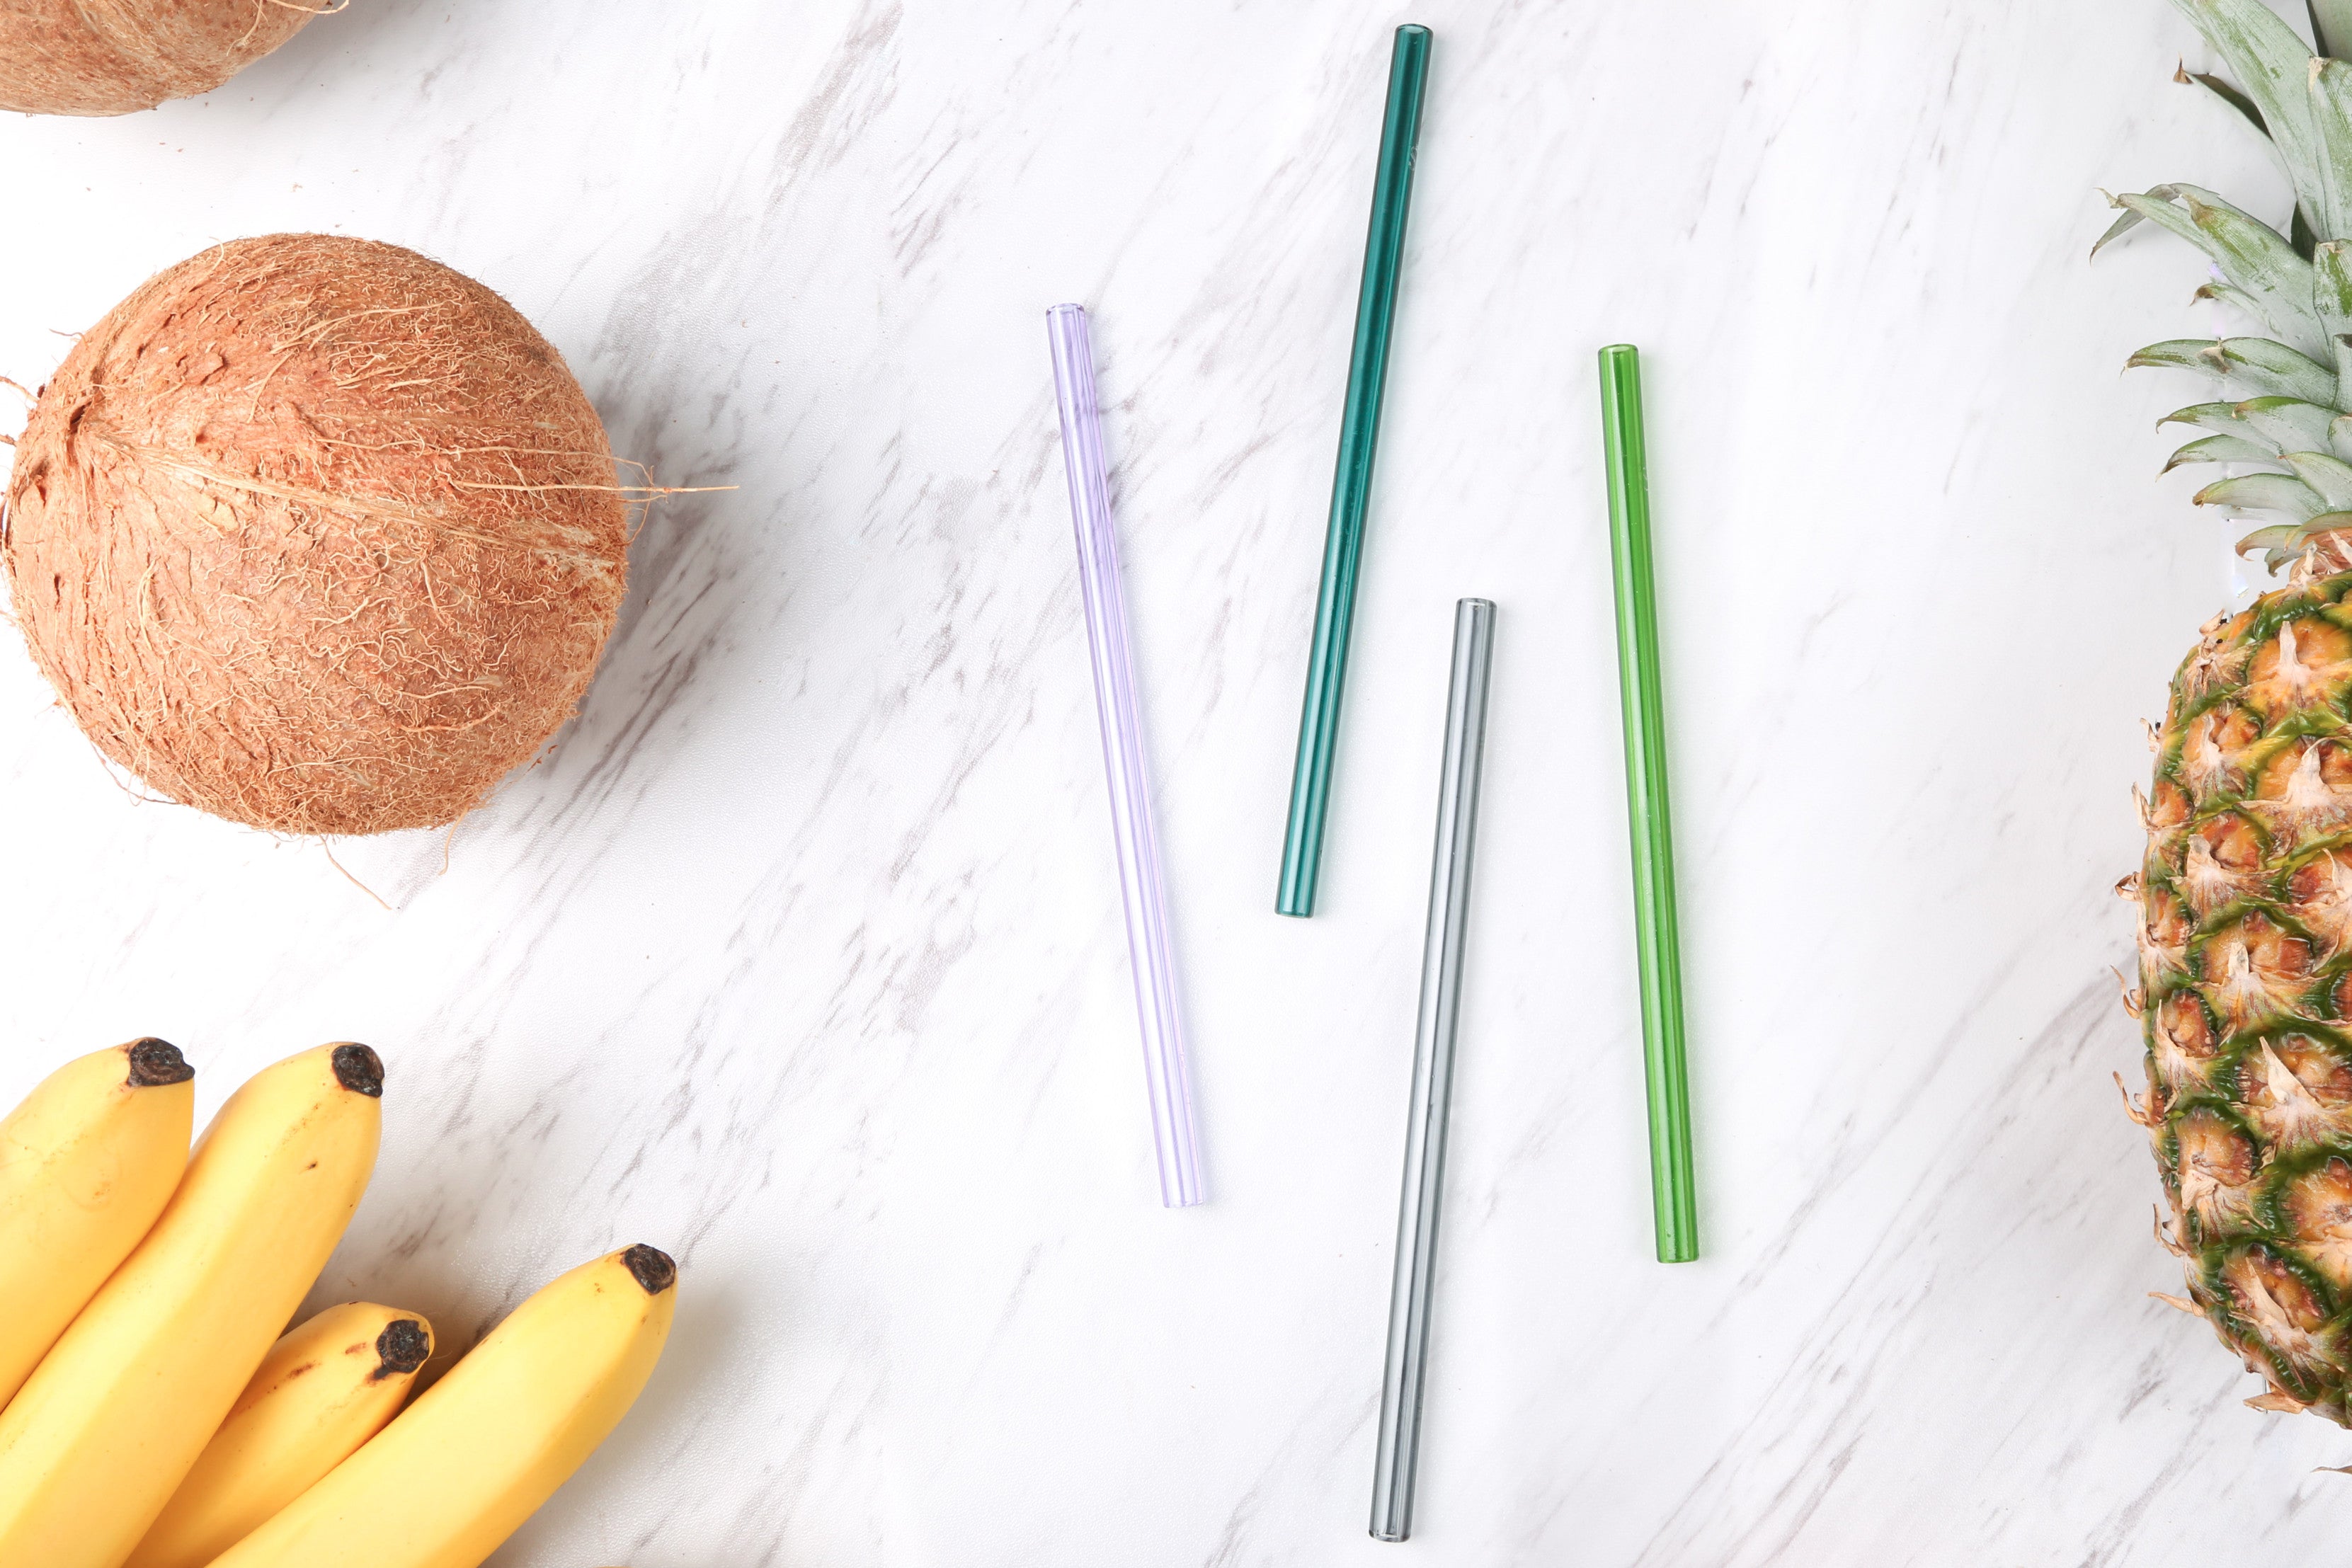 Reusable Colored Glass Drinking Straws, Suitable For Outdoor, Home